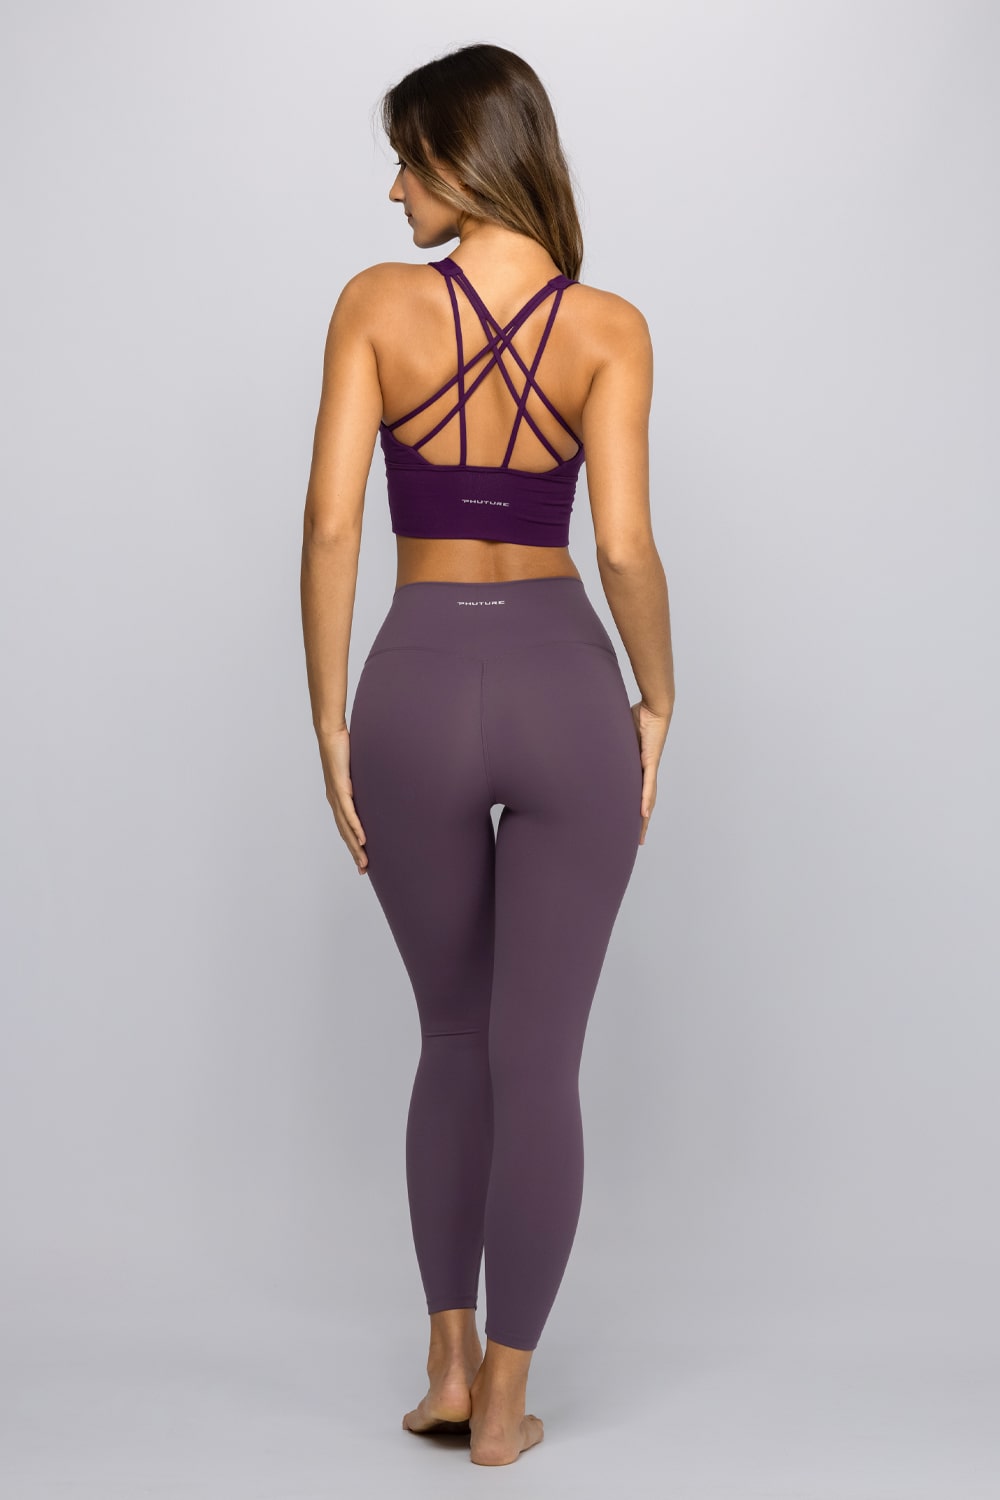 Luxana Lavender Outfit - Priscilla Ricart